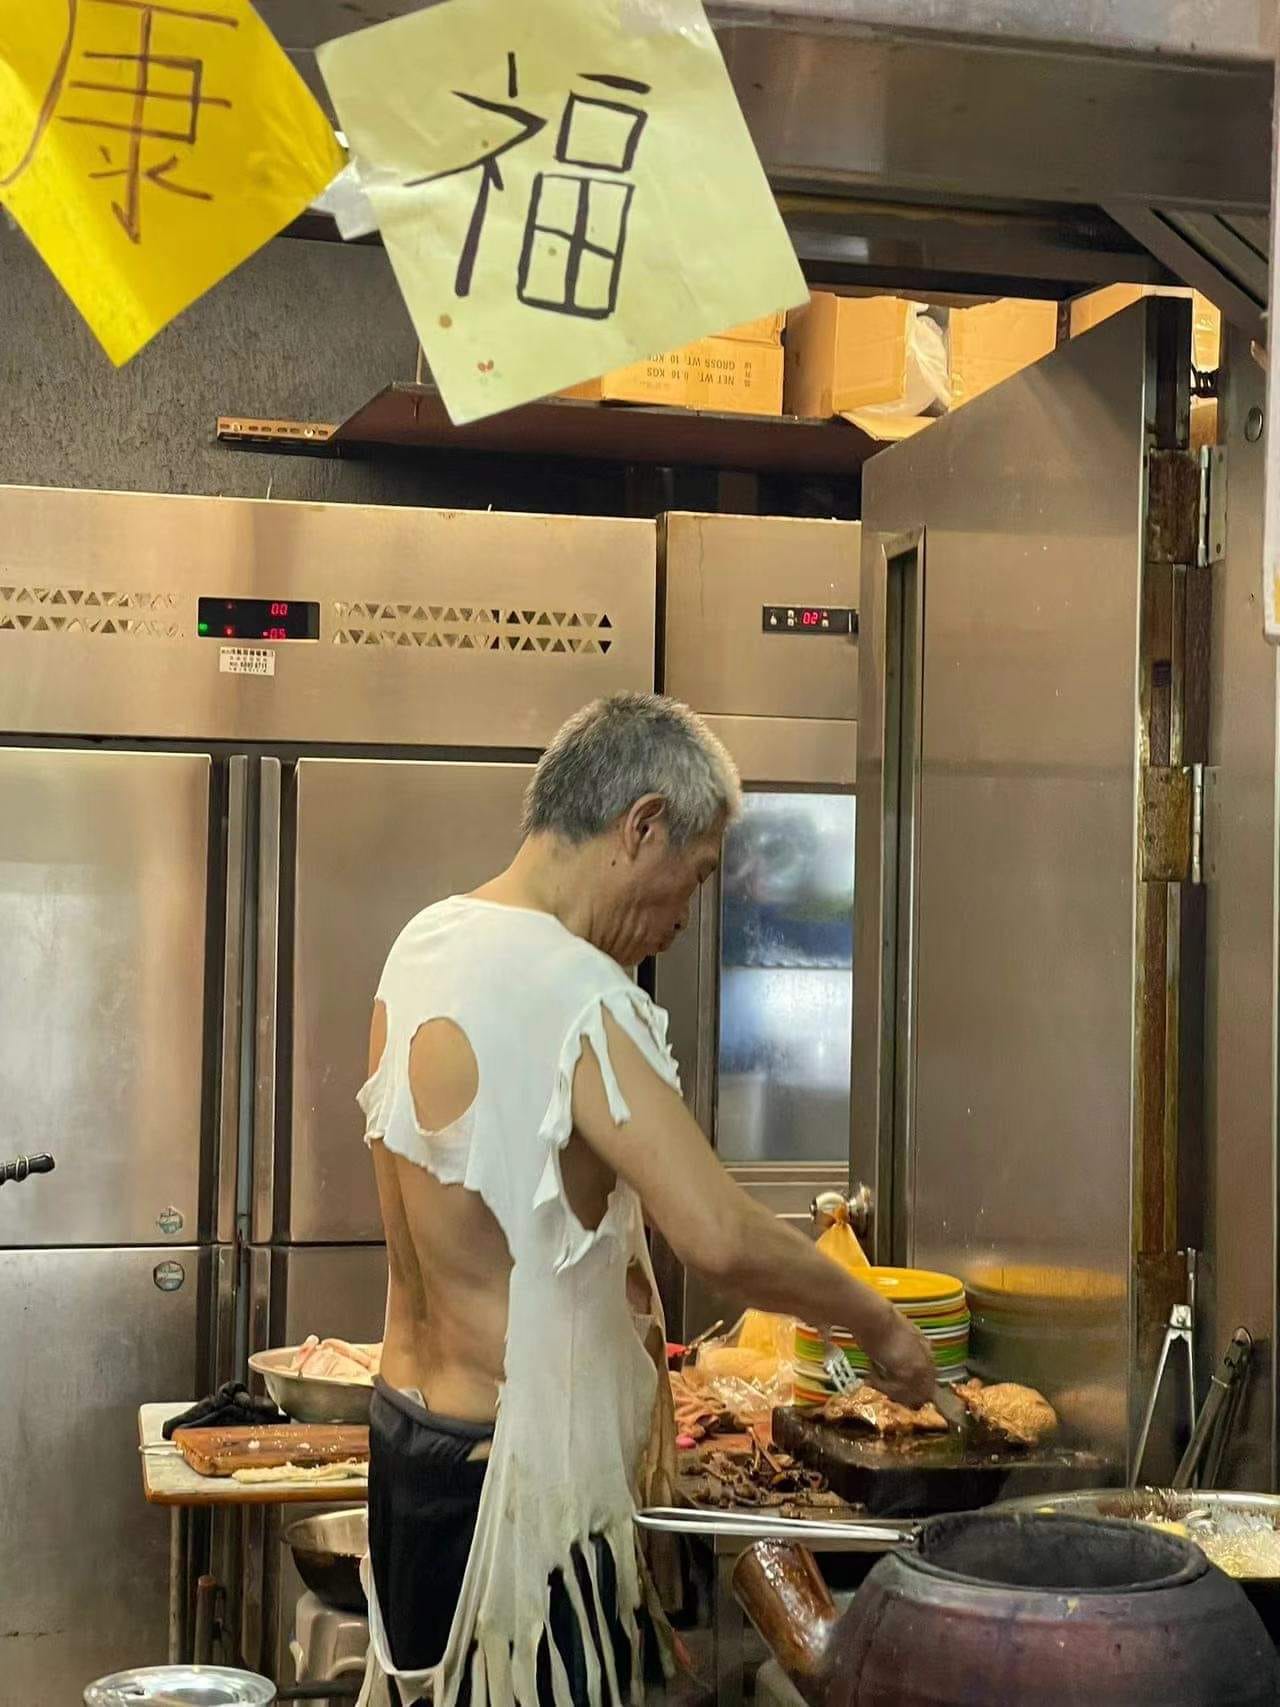 Hk chef's ragged outfit looks really similar to balenciaga outfit that costs rm4,700 | weirdkaya